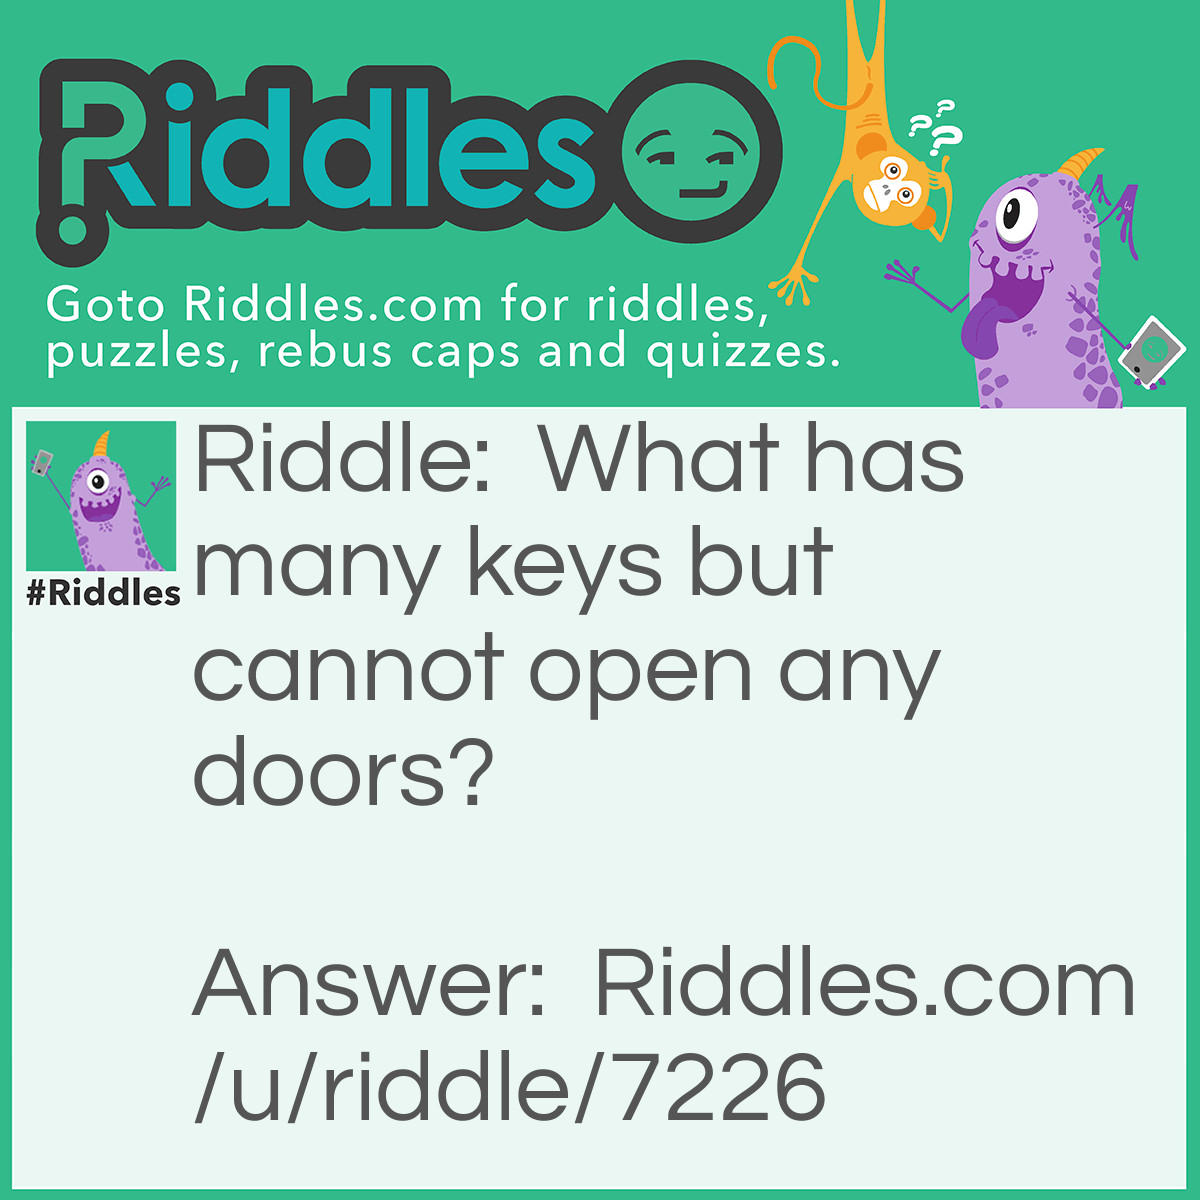 Riddle: What has many keys but cannot open any doors? Answer: A Piano.